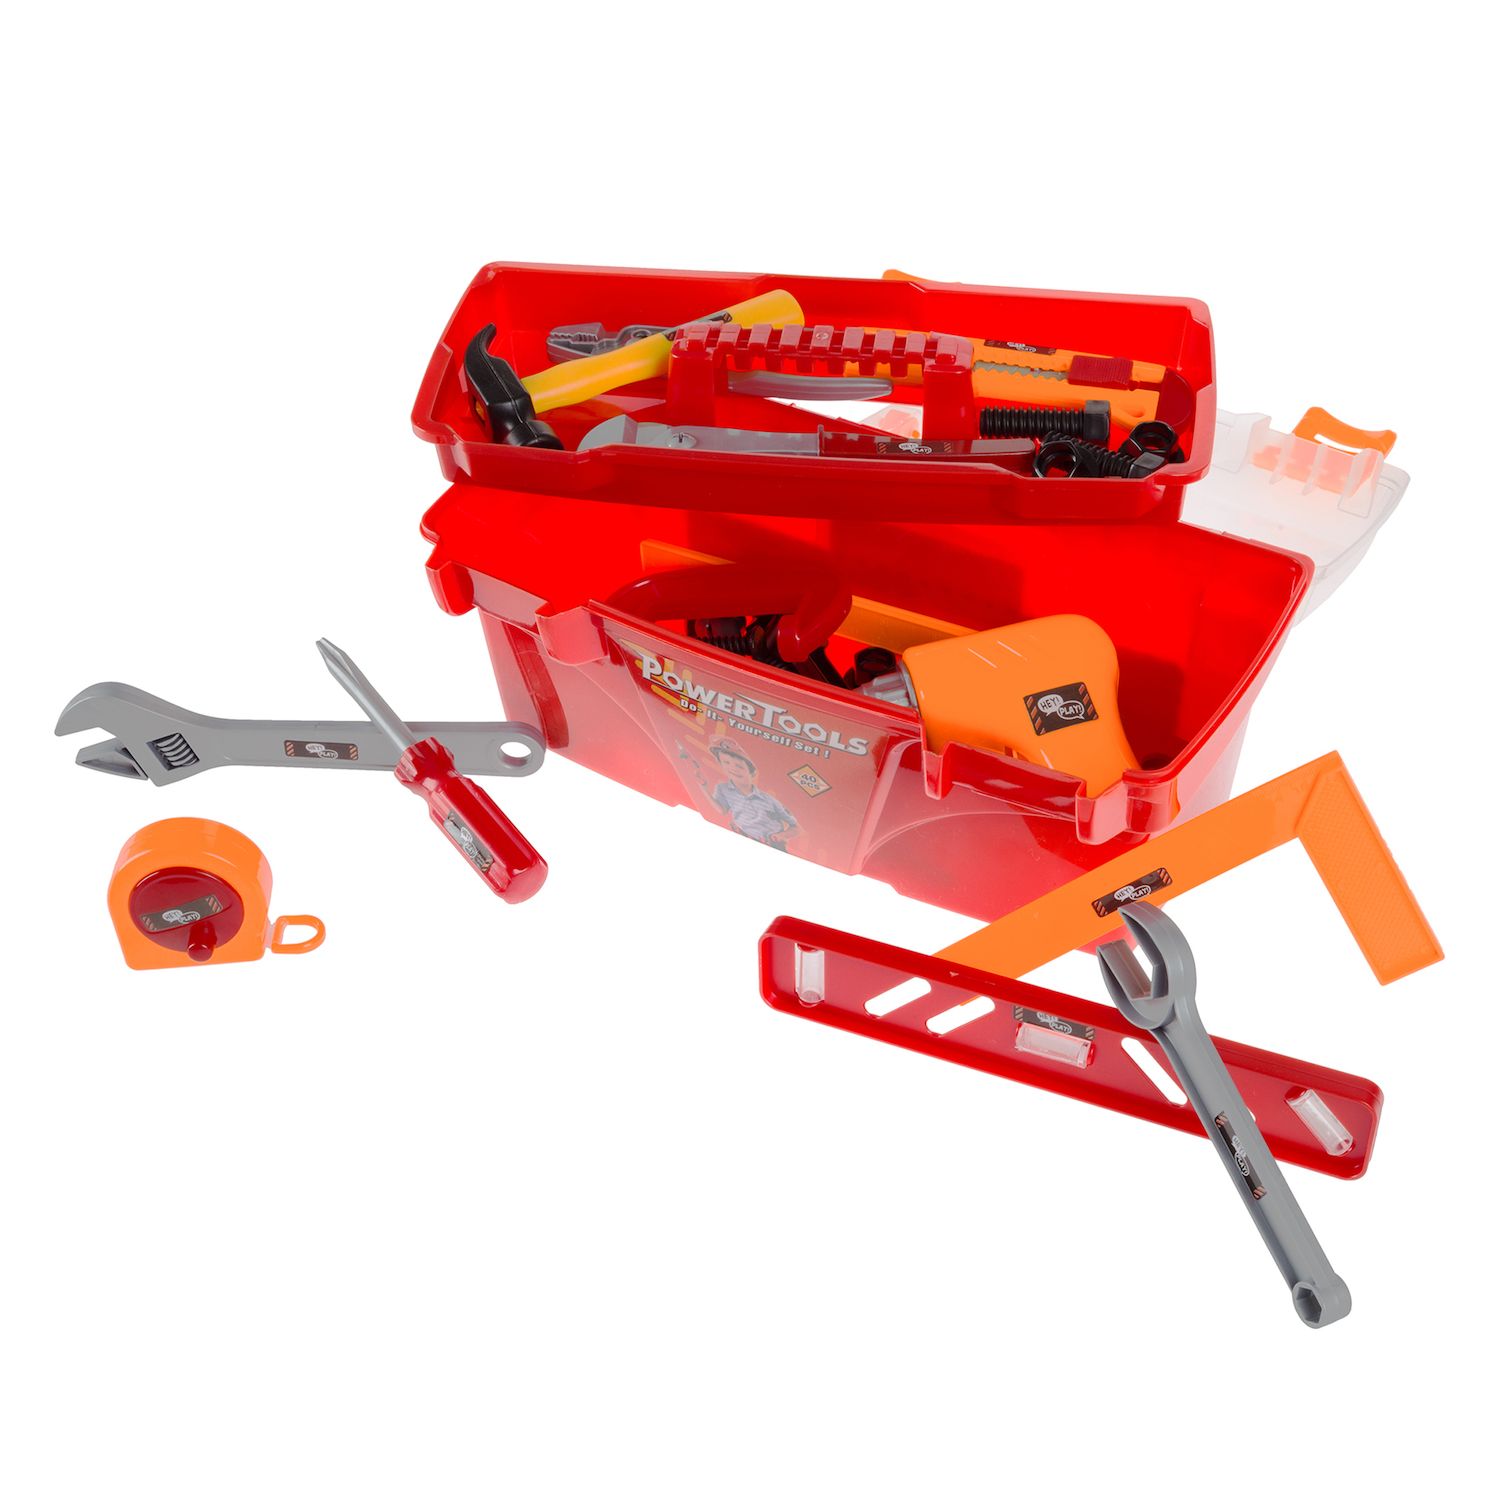 Image for Hey! Play! 40-Piece Toy Tool Box Set at Kohl's.